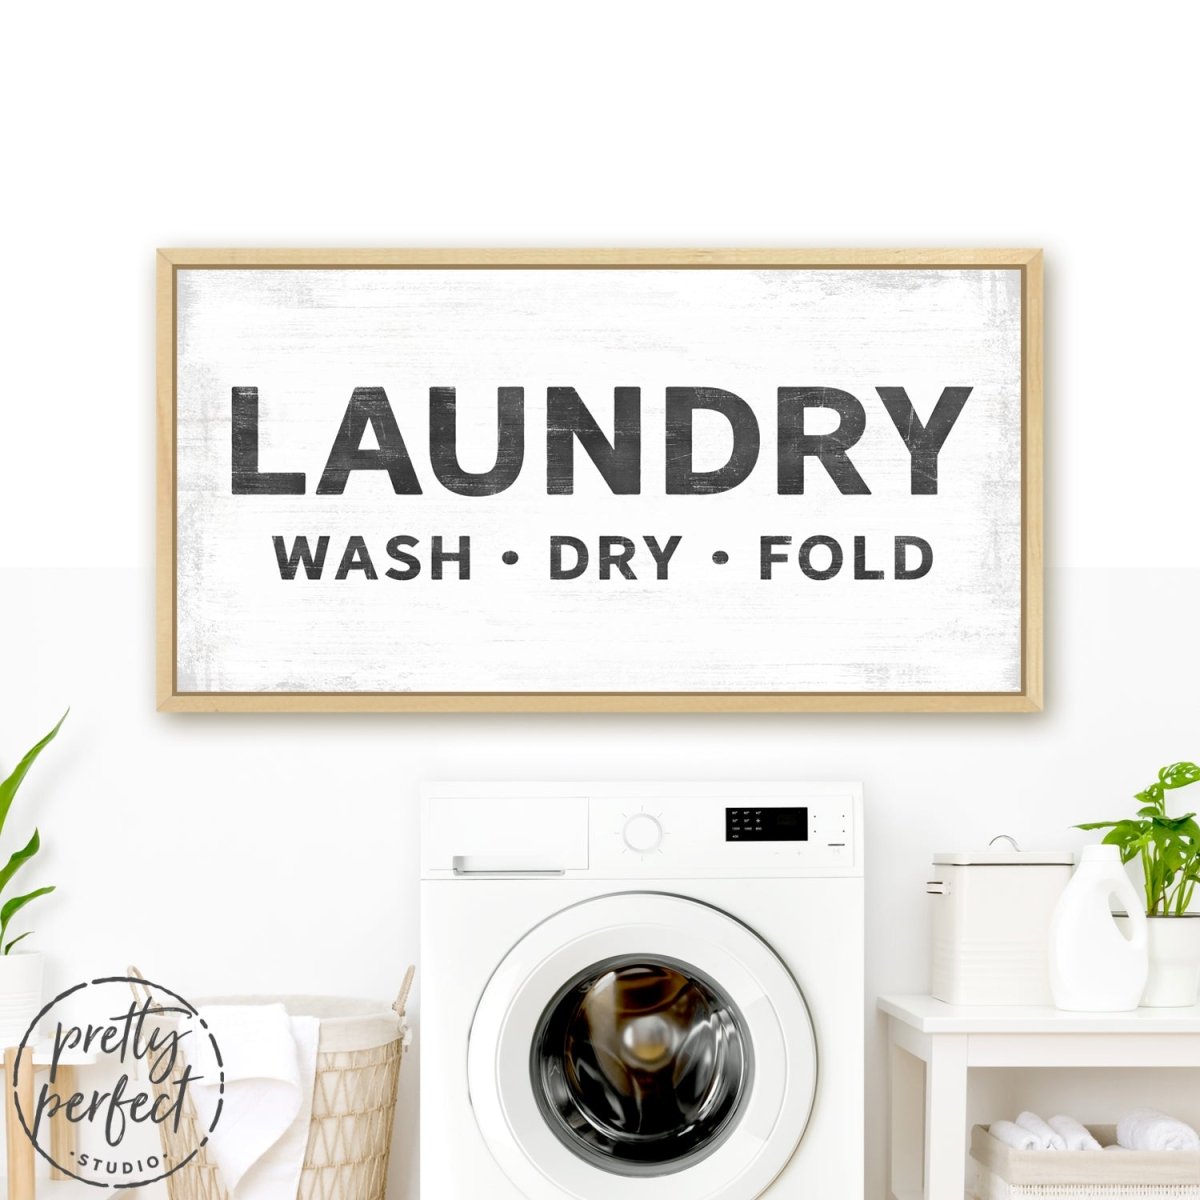 Laundry Sign Above Dryer - Wash, Dry, and Fold - Pretty Perfect Studio